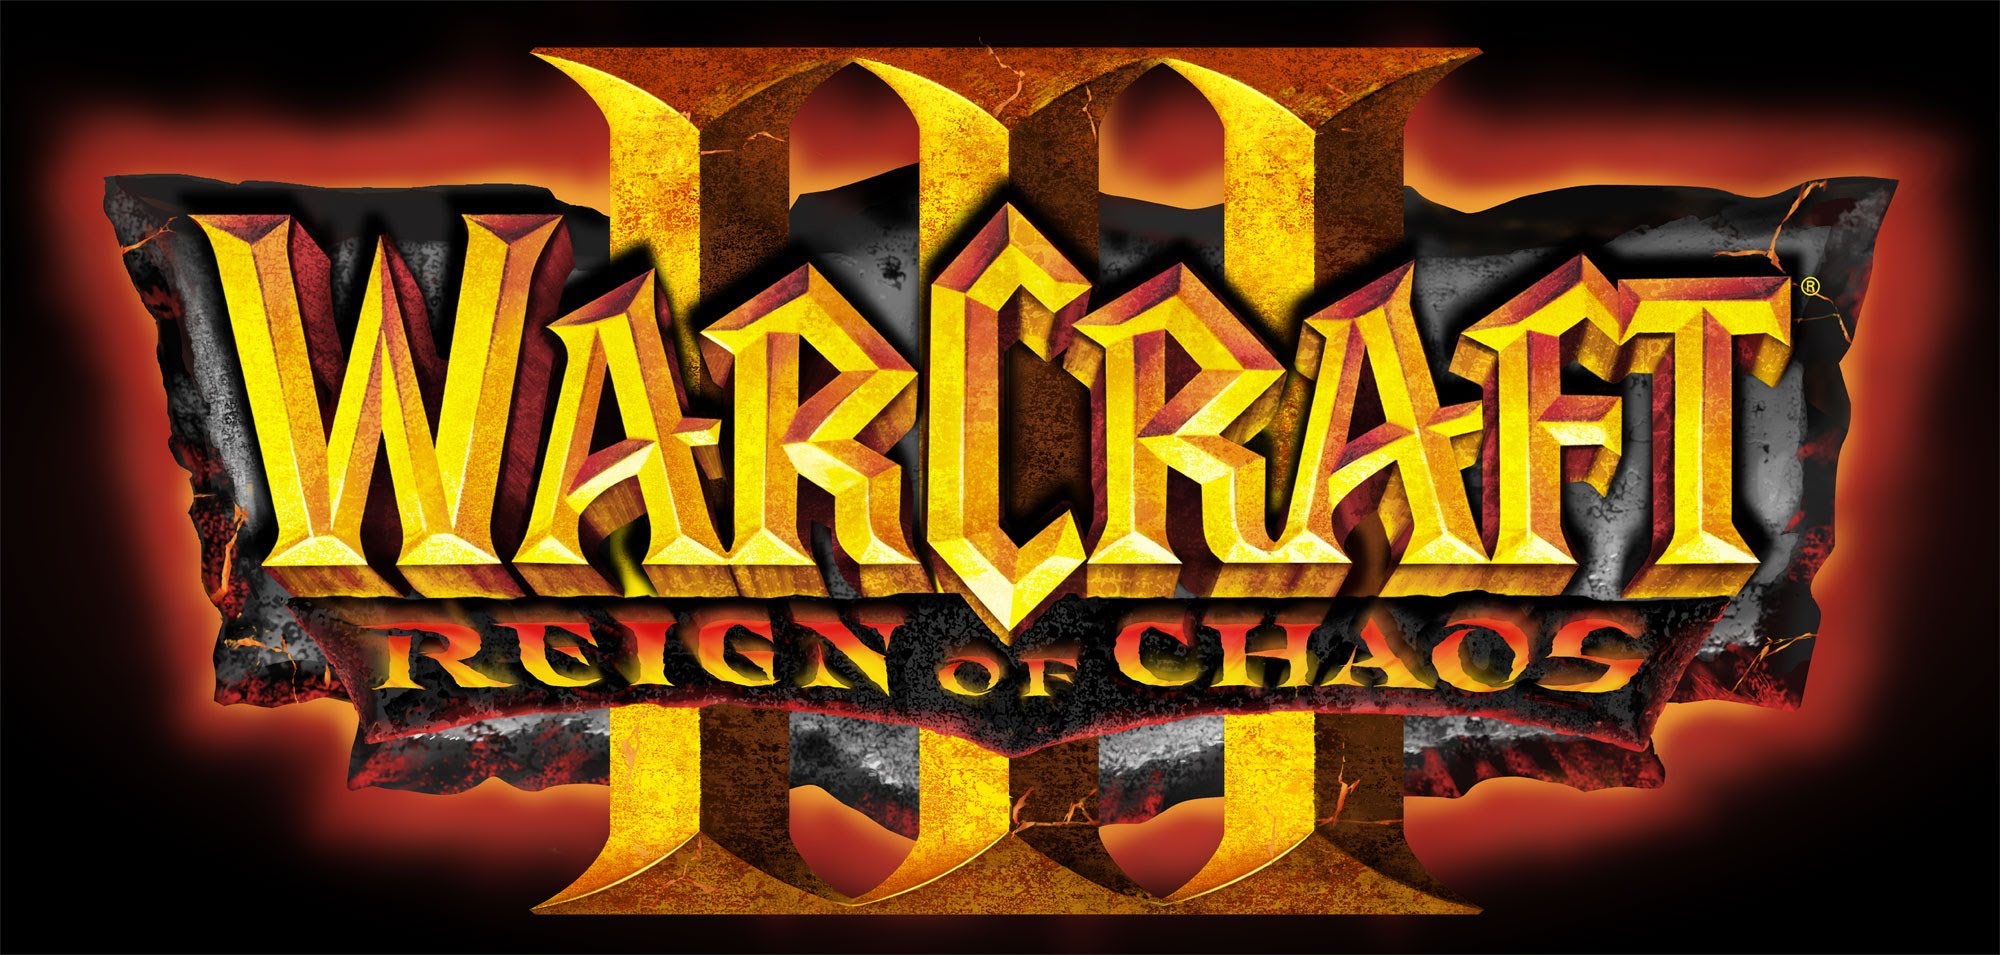 Warcraft III: Reign Of Chaos #24